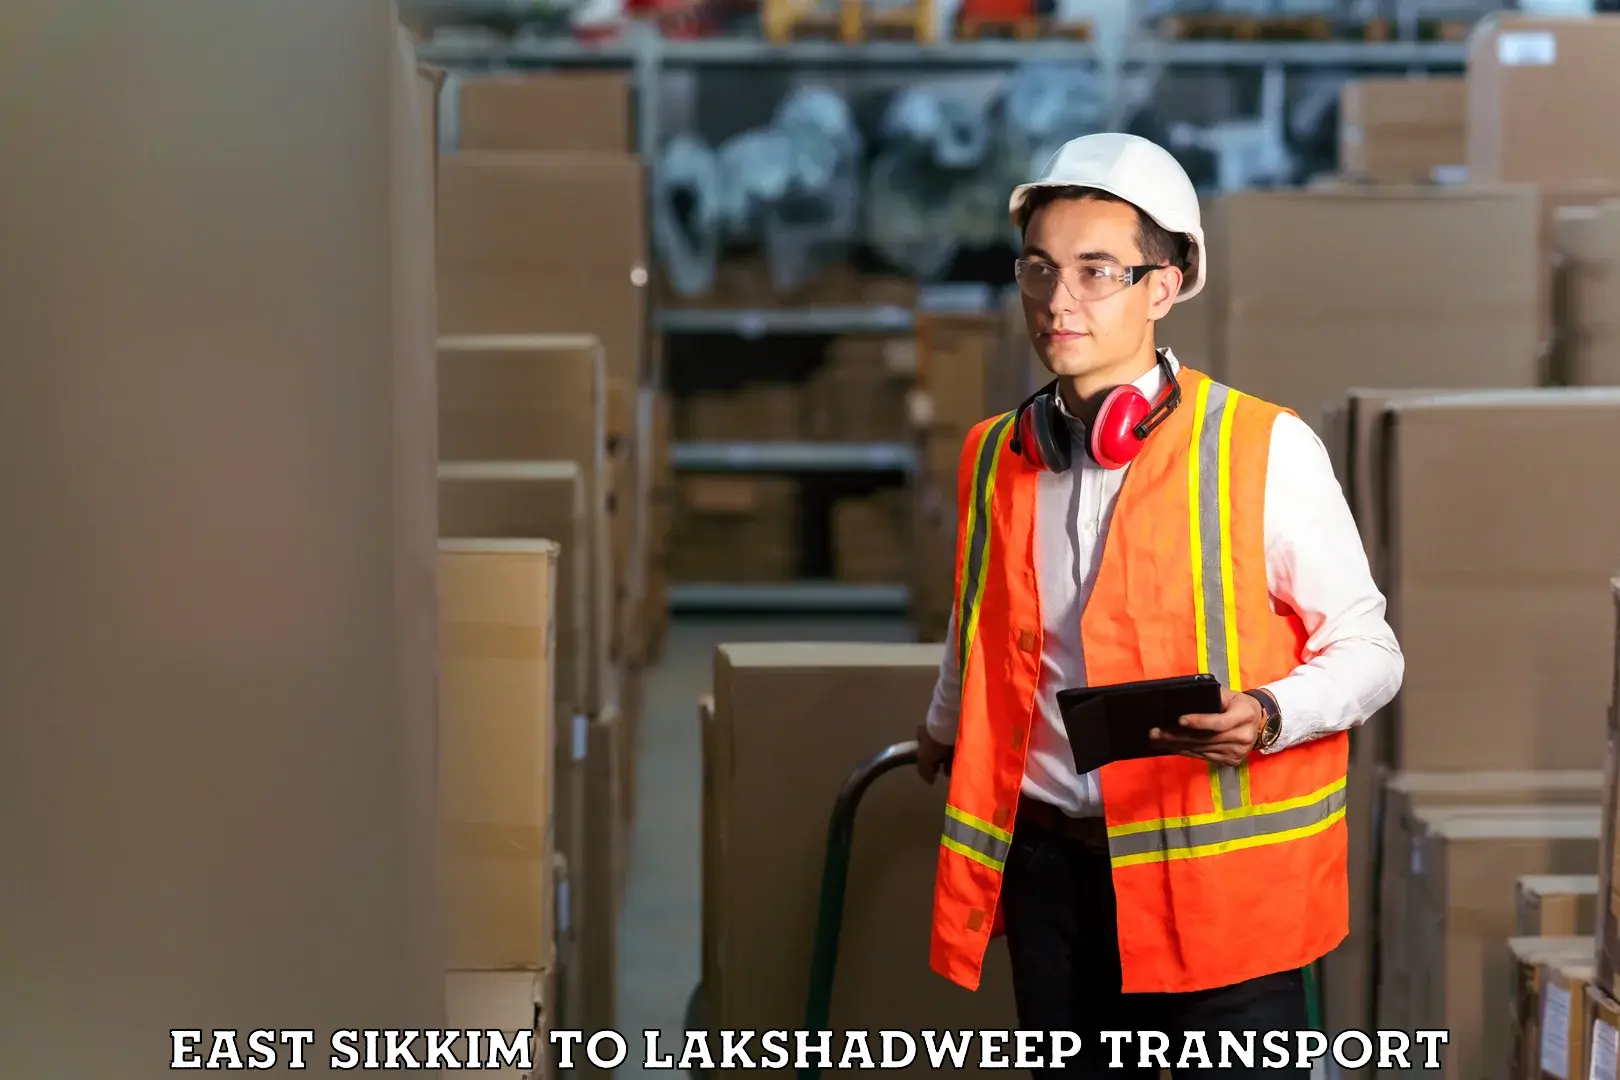 Commercial transport service East Sikkim to Lakshadweep